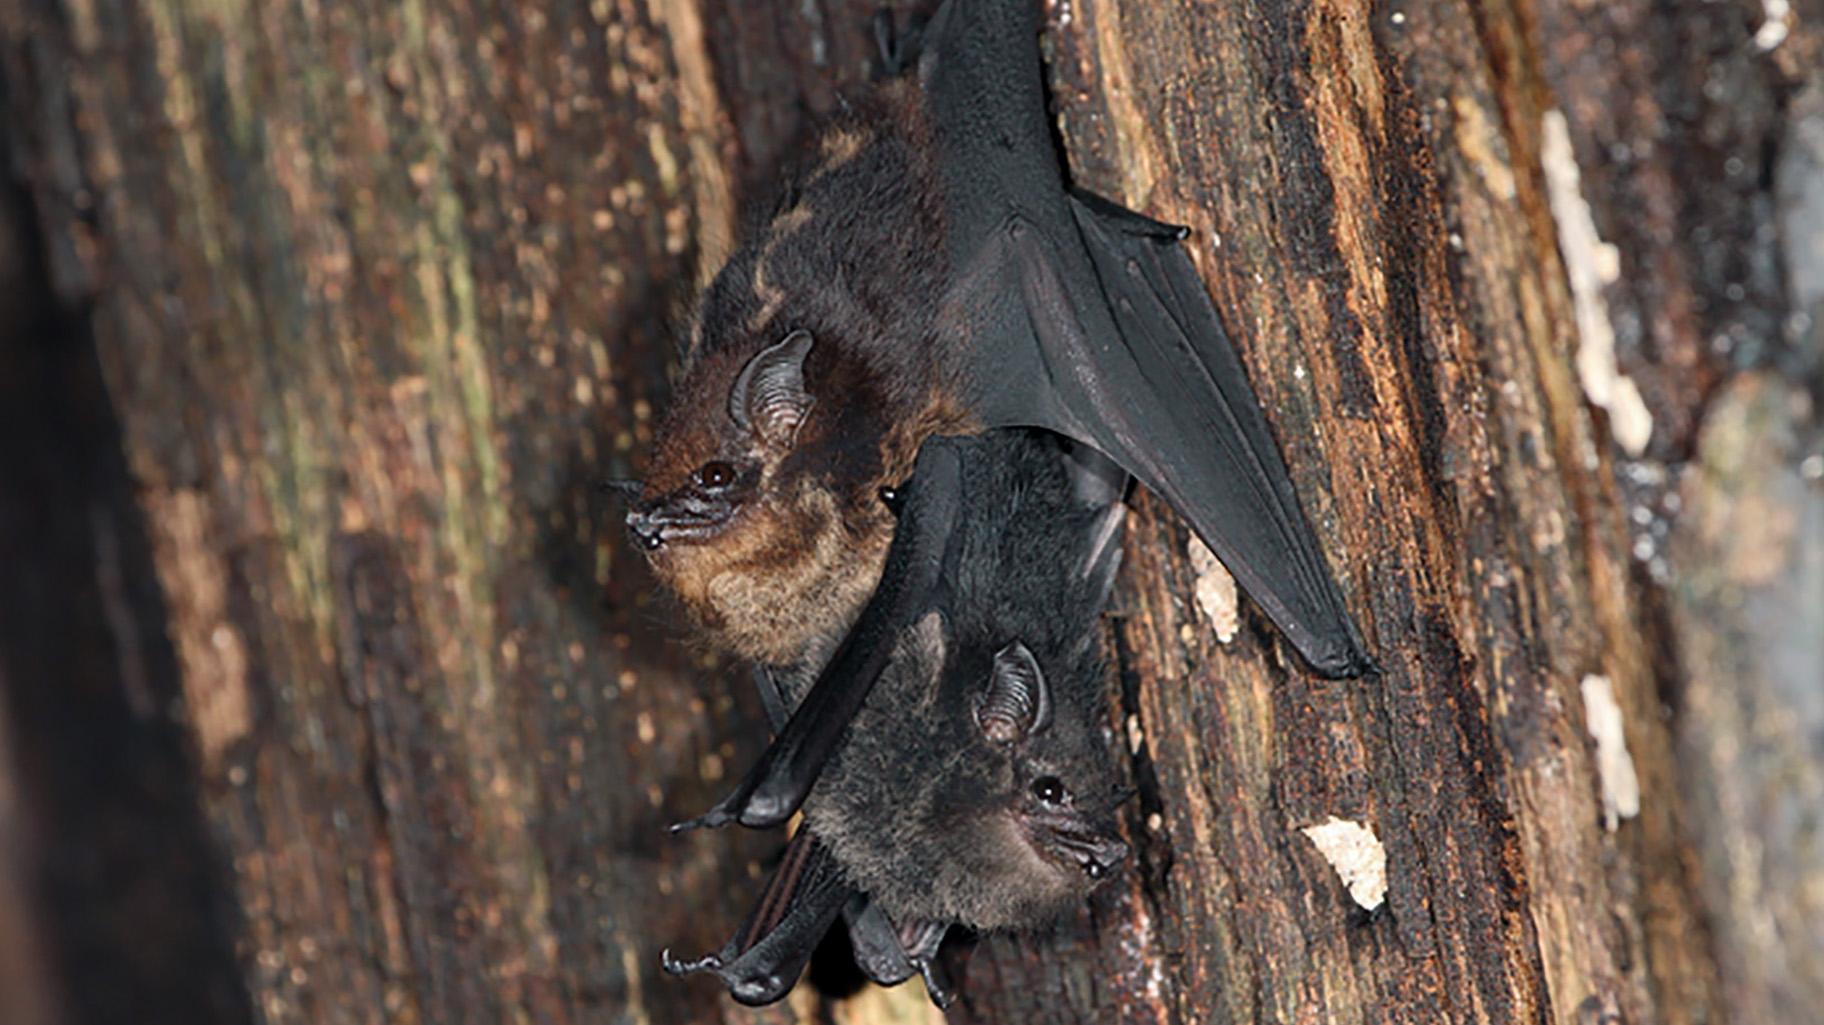 Mother and pup of the bat species Saccopteryx bilineata. Similar to human infants, pups begin babbling at a young age as they develop language skills. (Courtesy Ahana Fernandez / Michael Stifter)